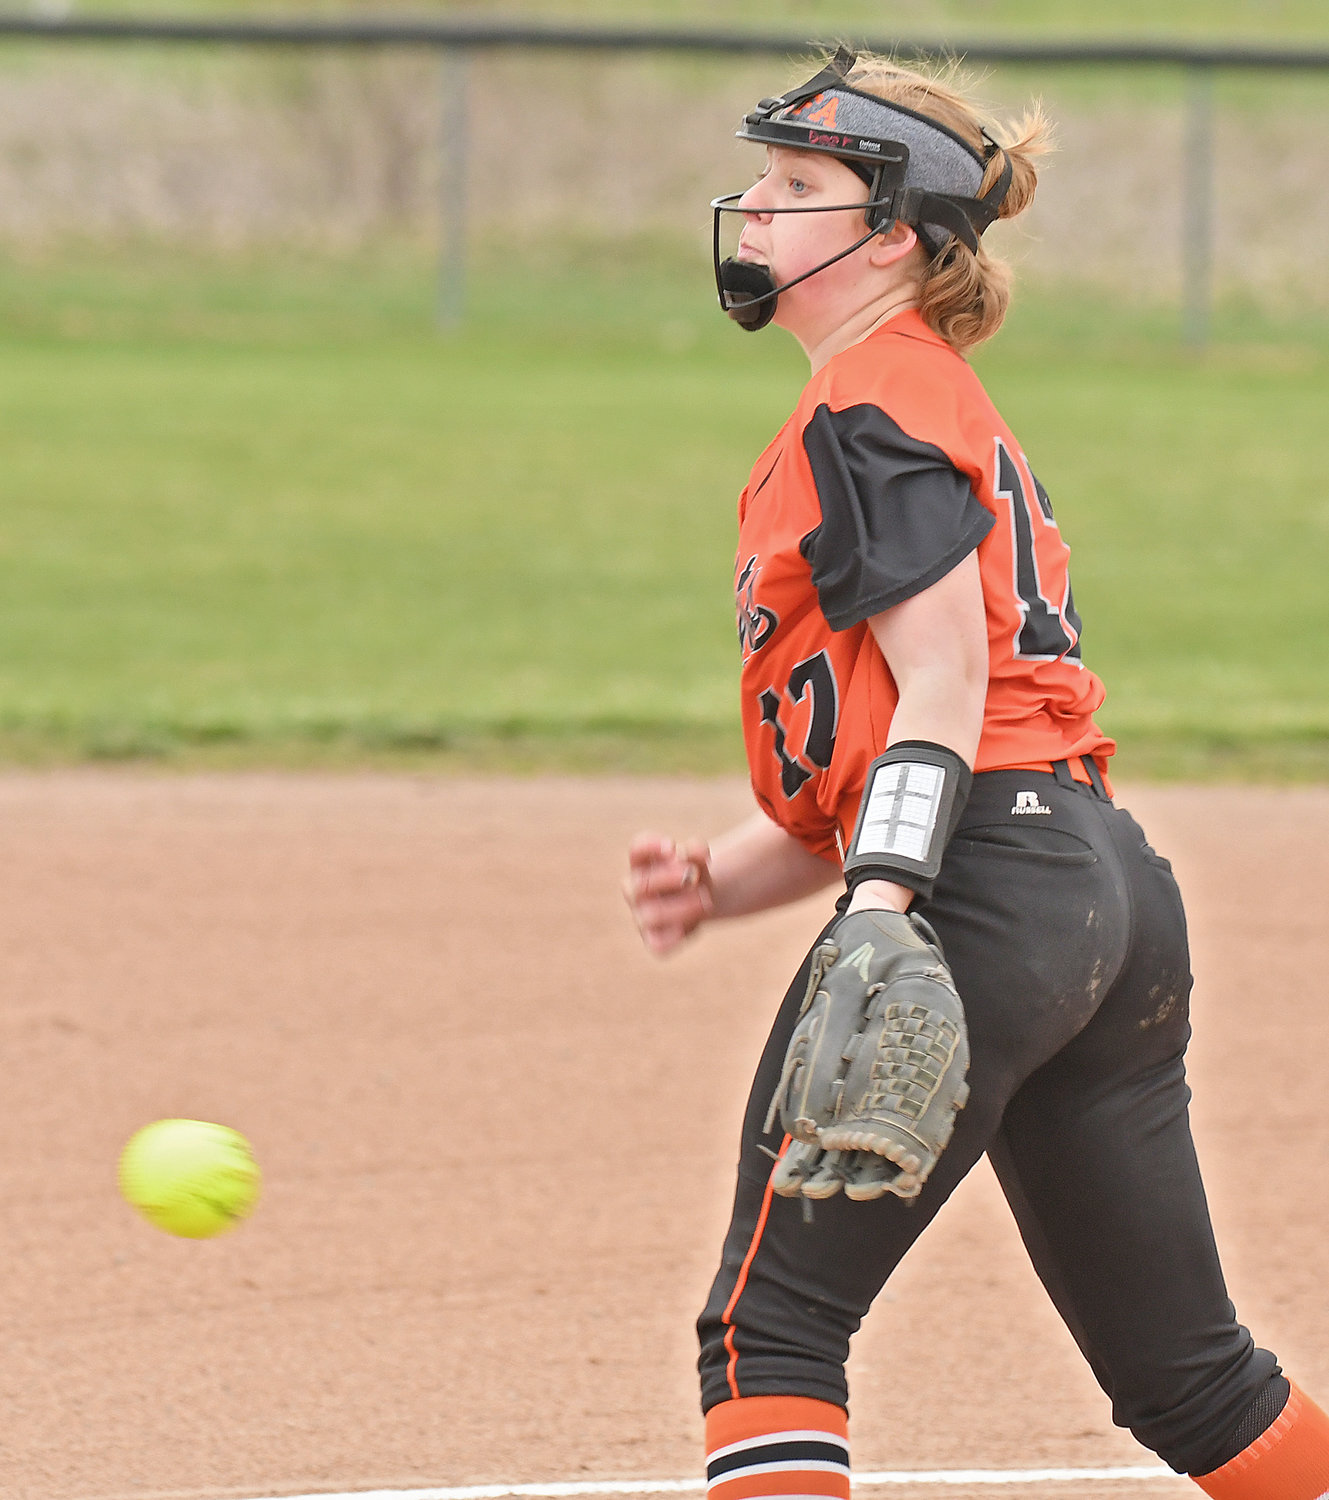 INCOMING — Rome Free Academy pitcher Laina Beer makes a pitch in the first inning of Monday's 4-3 loss at home to Fayetteville-Manlius. Beer struck out 10 in the complete game effort.